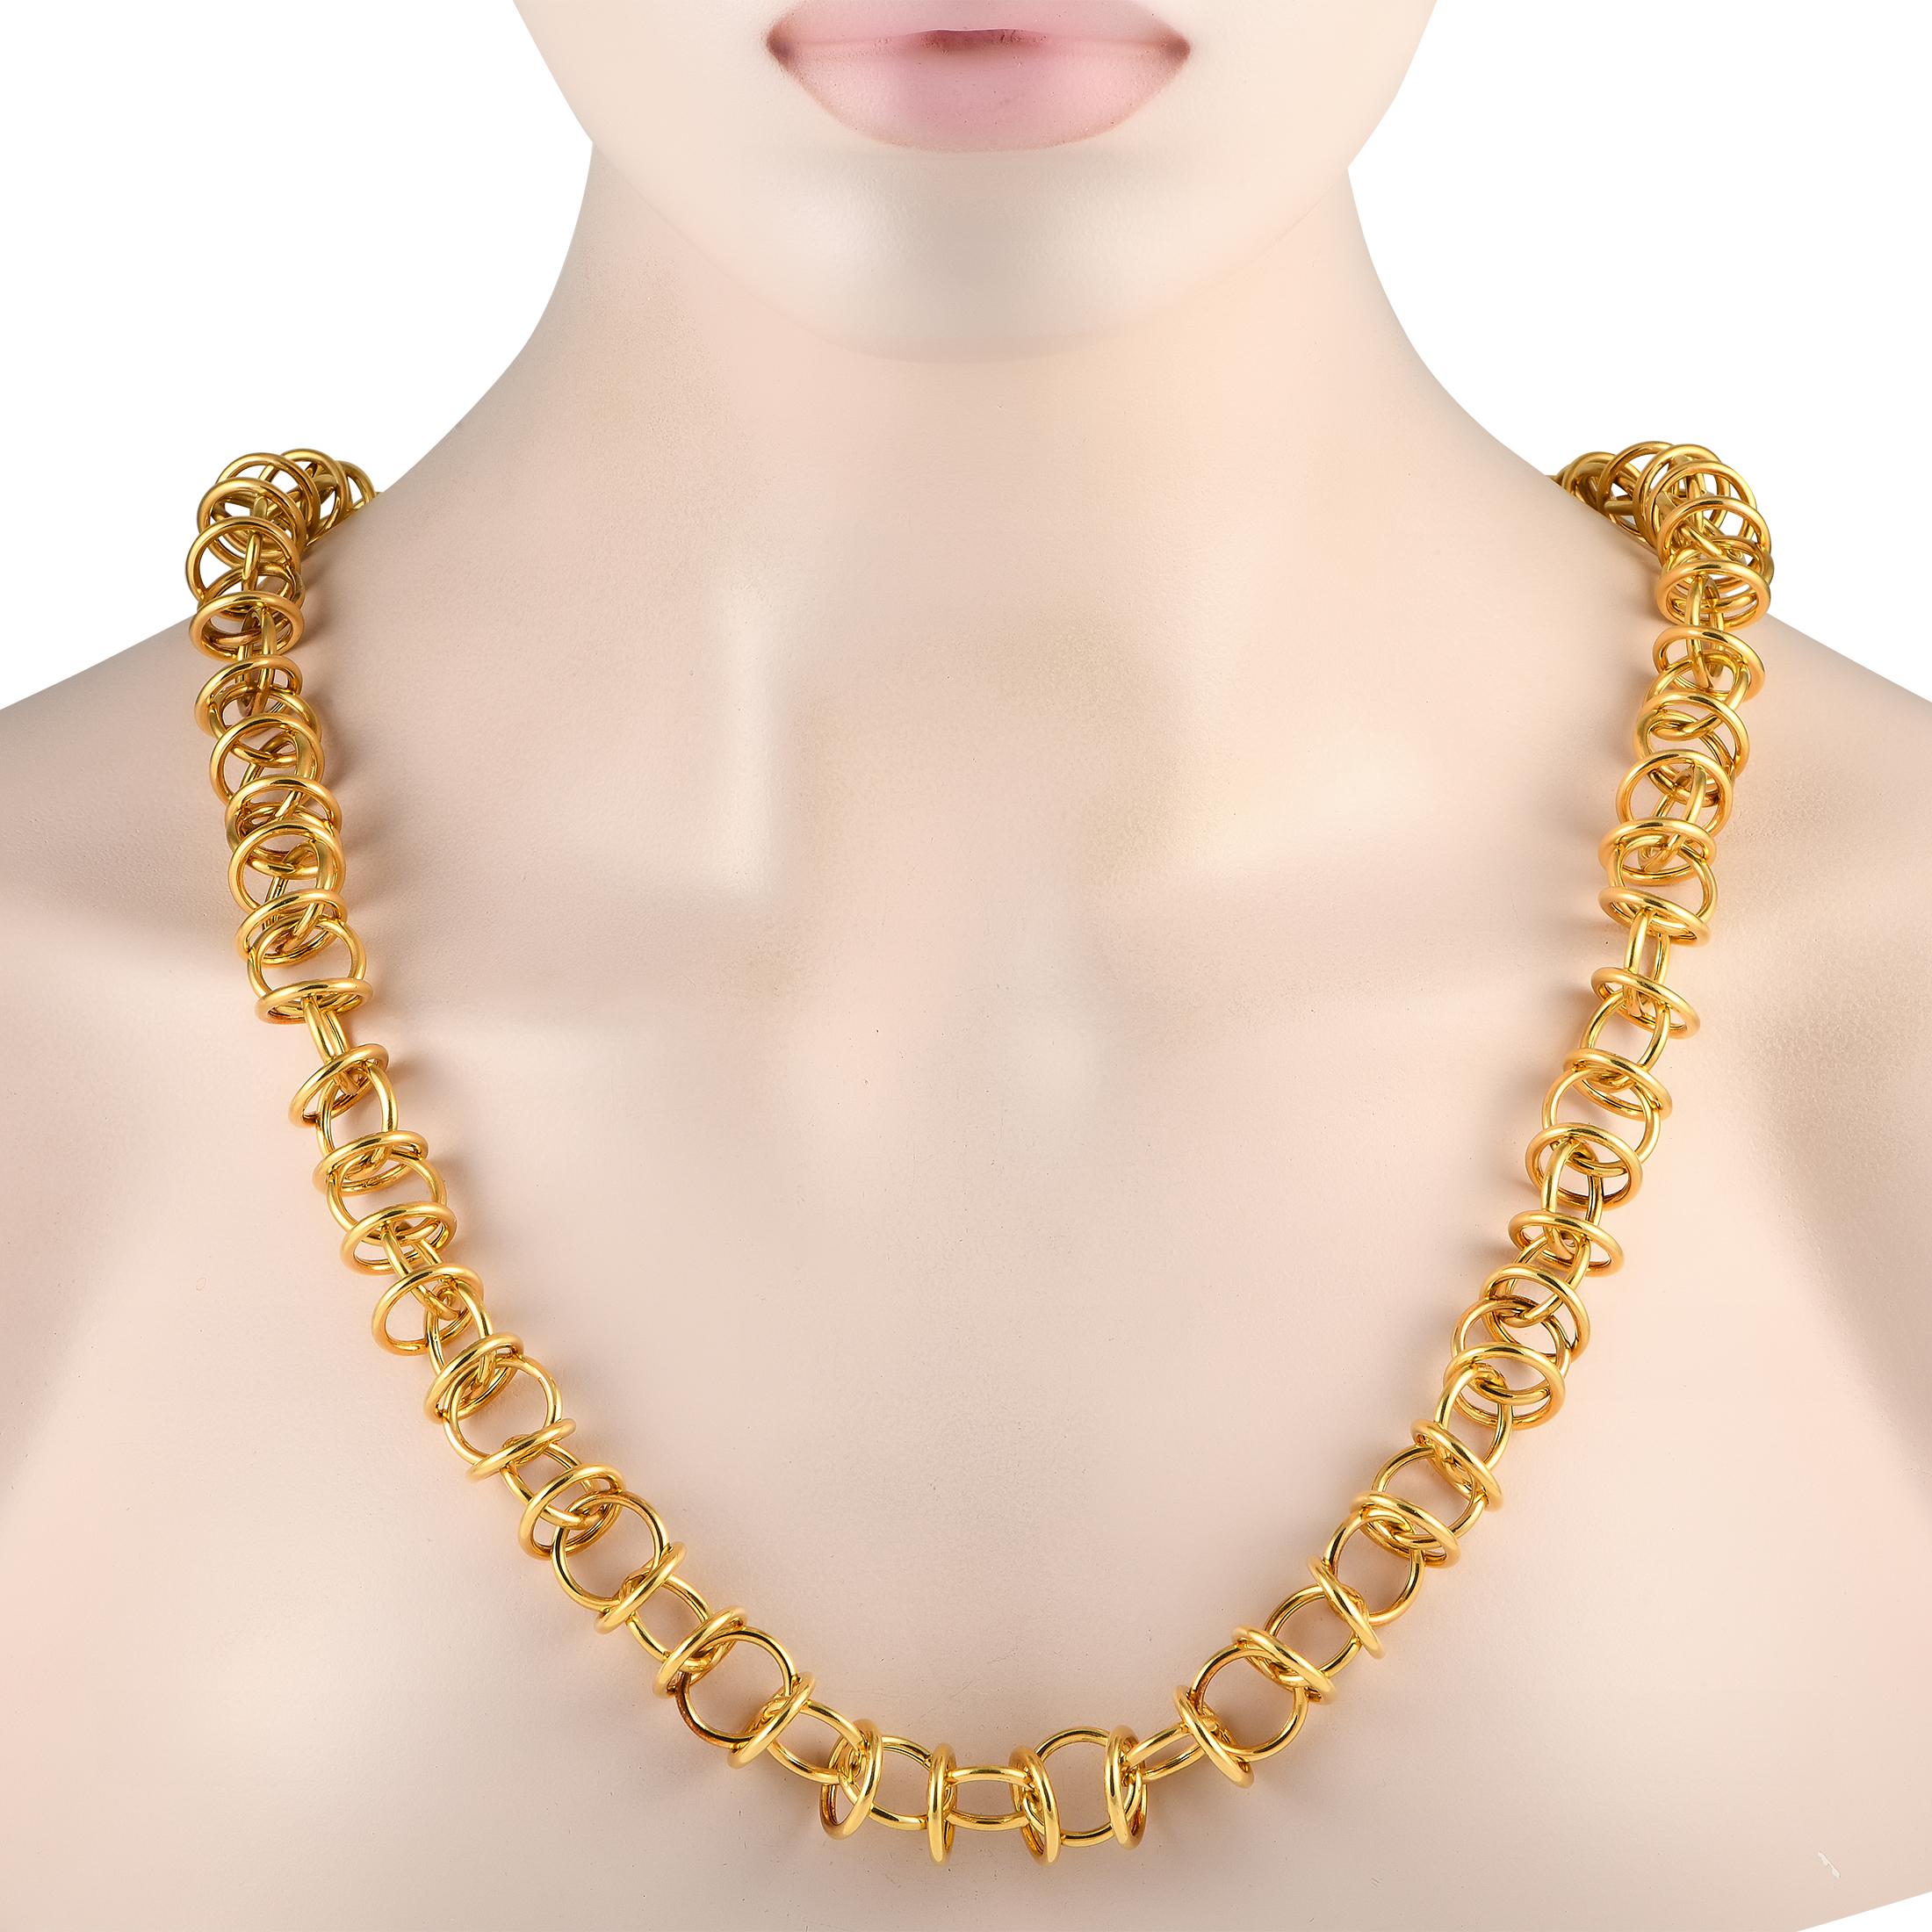 A series of circular 18K Yellow Gold links make this bold Tiffany & Co. necklace impossible to ignore. Simple yet statement-making, this impeccably crafted accessory measures 30 long. This jewelry piece is offered in estate condition and includes a